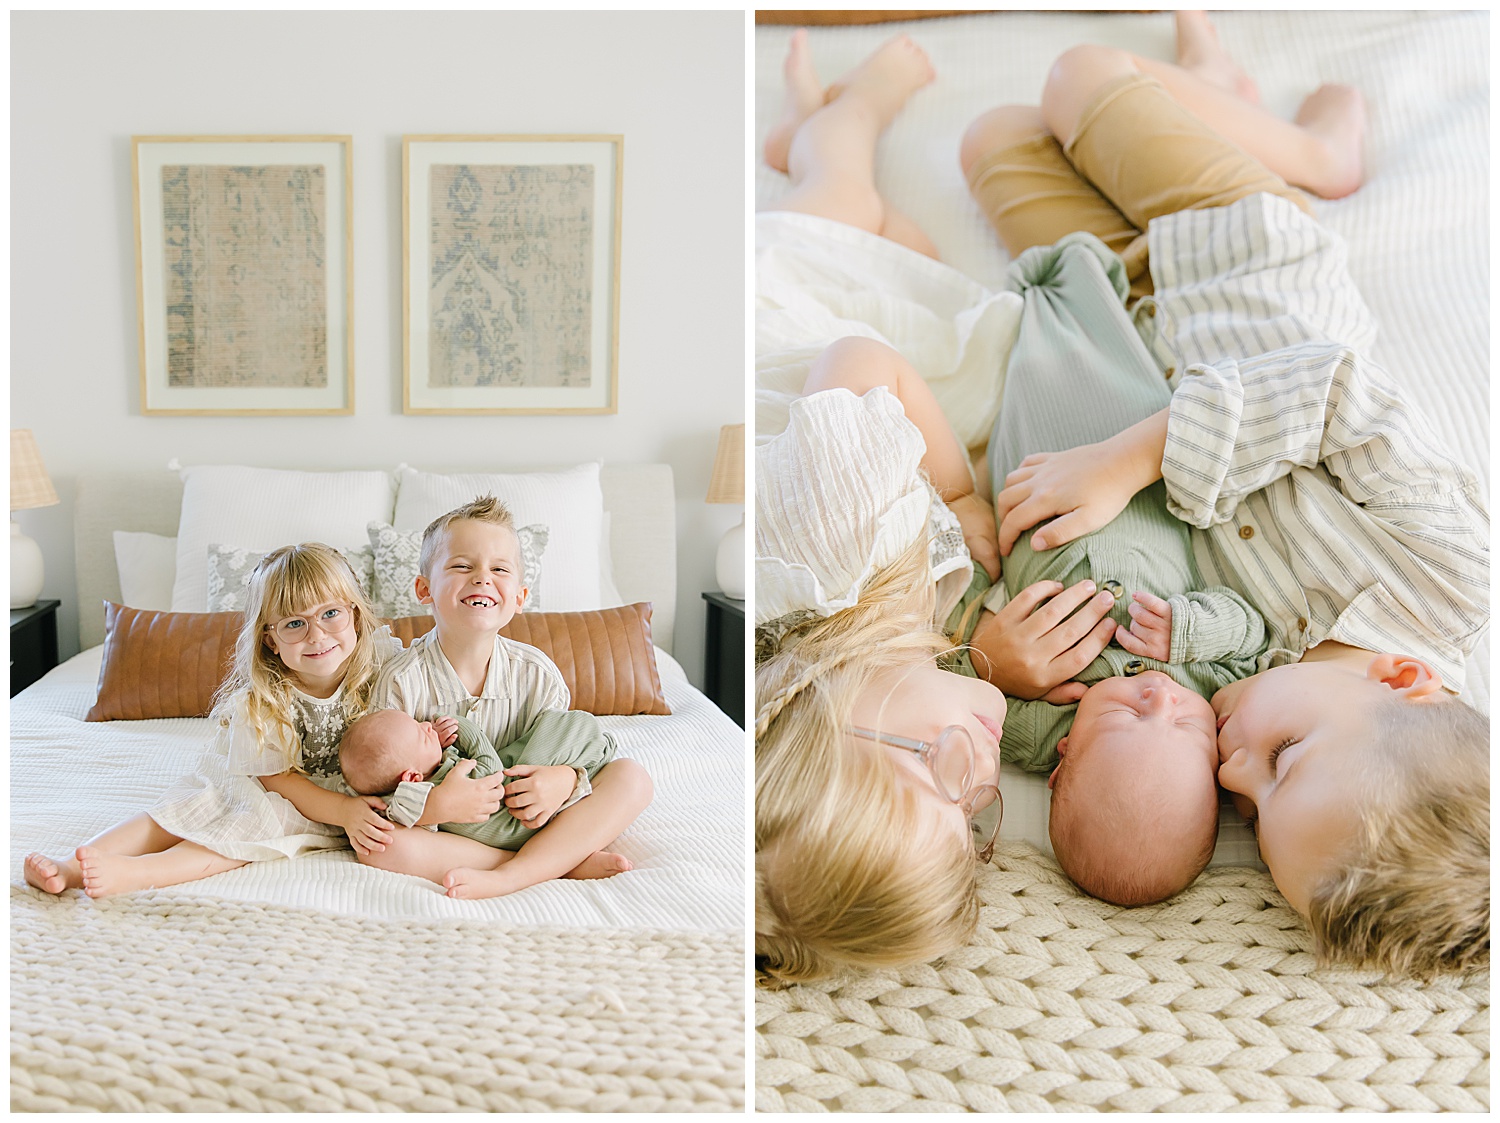 In-home newborn family photography session. Lifestyle family photo with 3 kids.